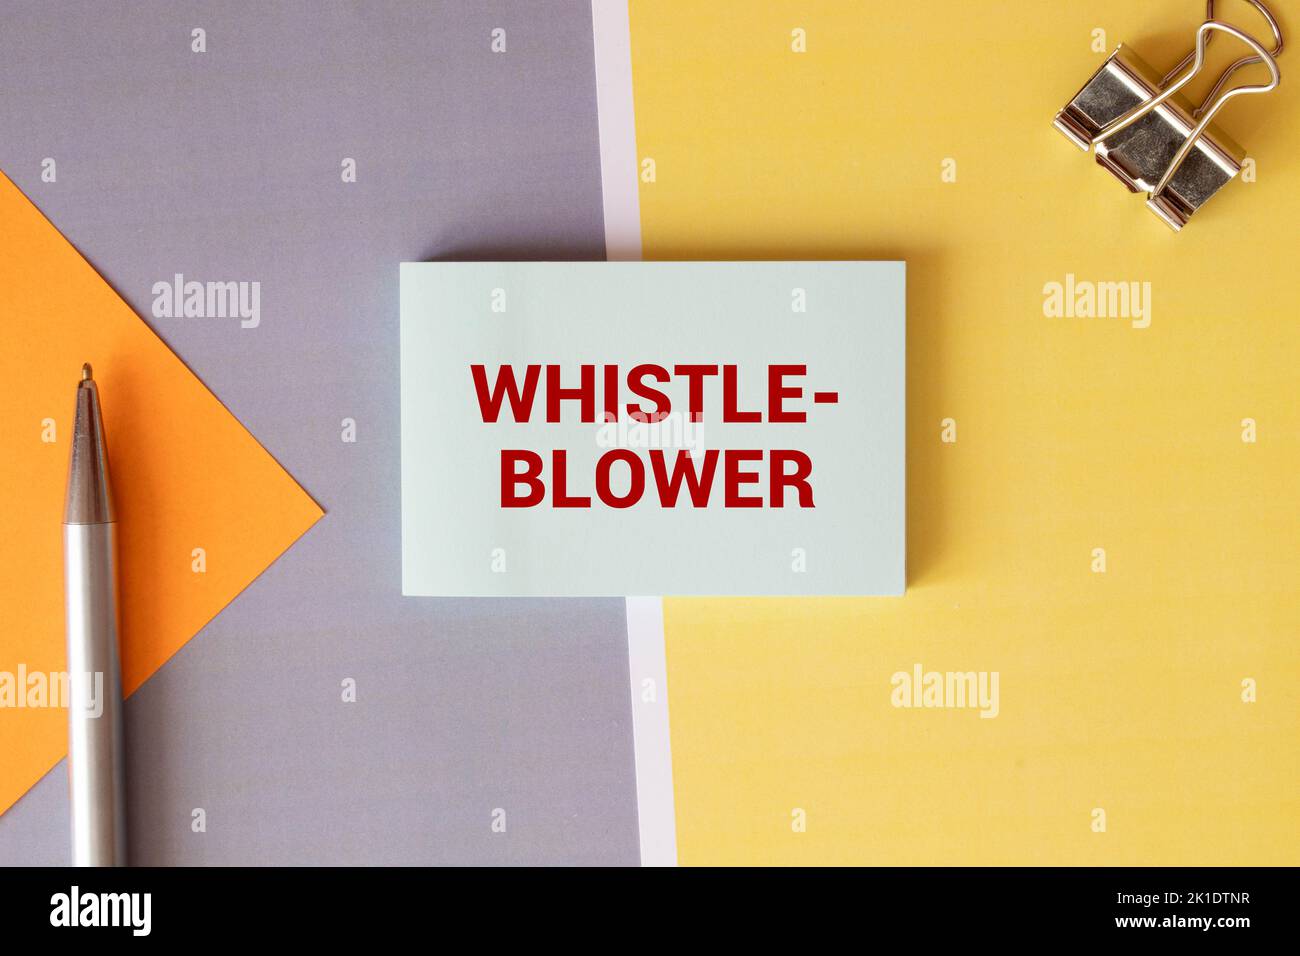 whistle blower text concept on torn paper Stock Photo